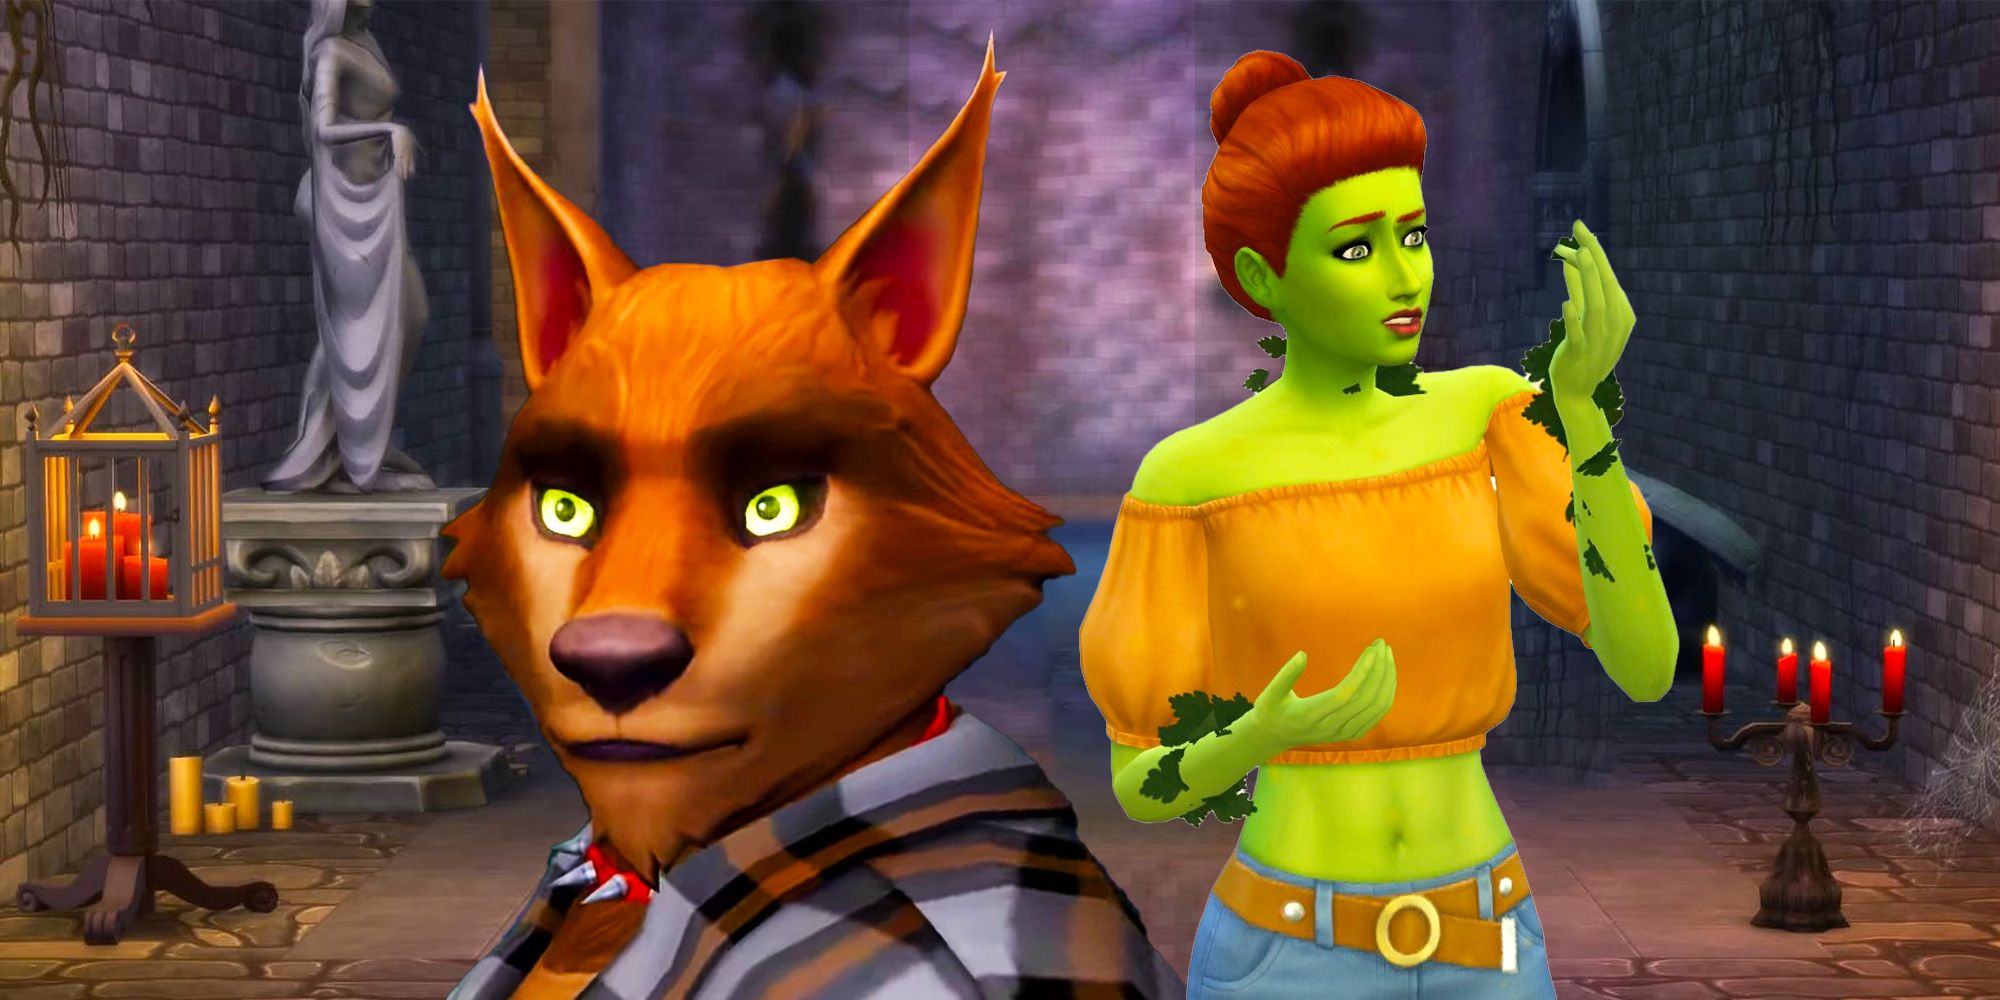 A werewolf Sim and a plant Sim in screenshots from The Sims 4.